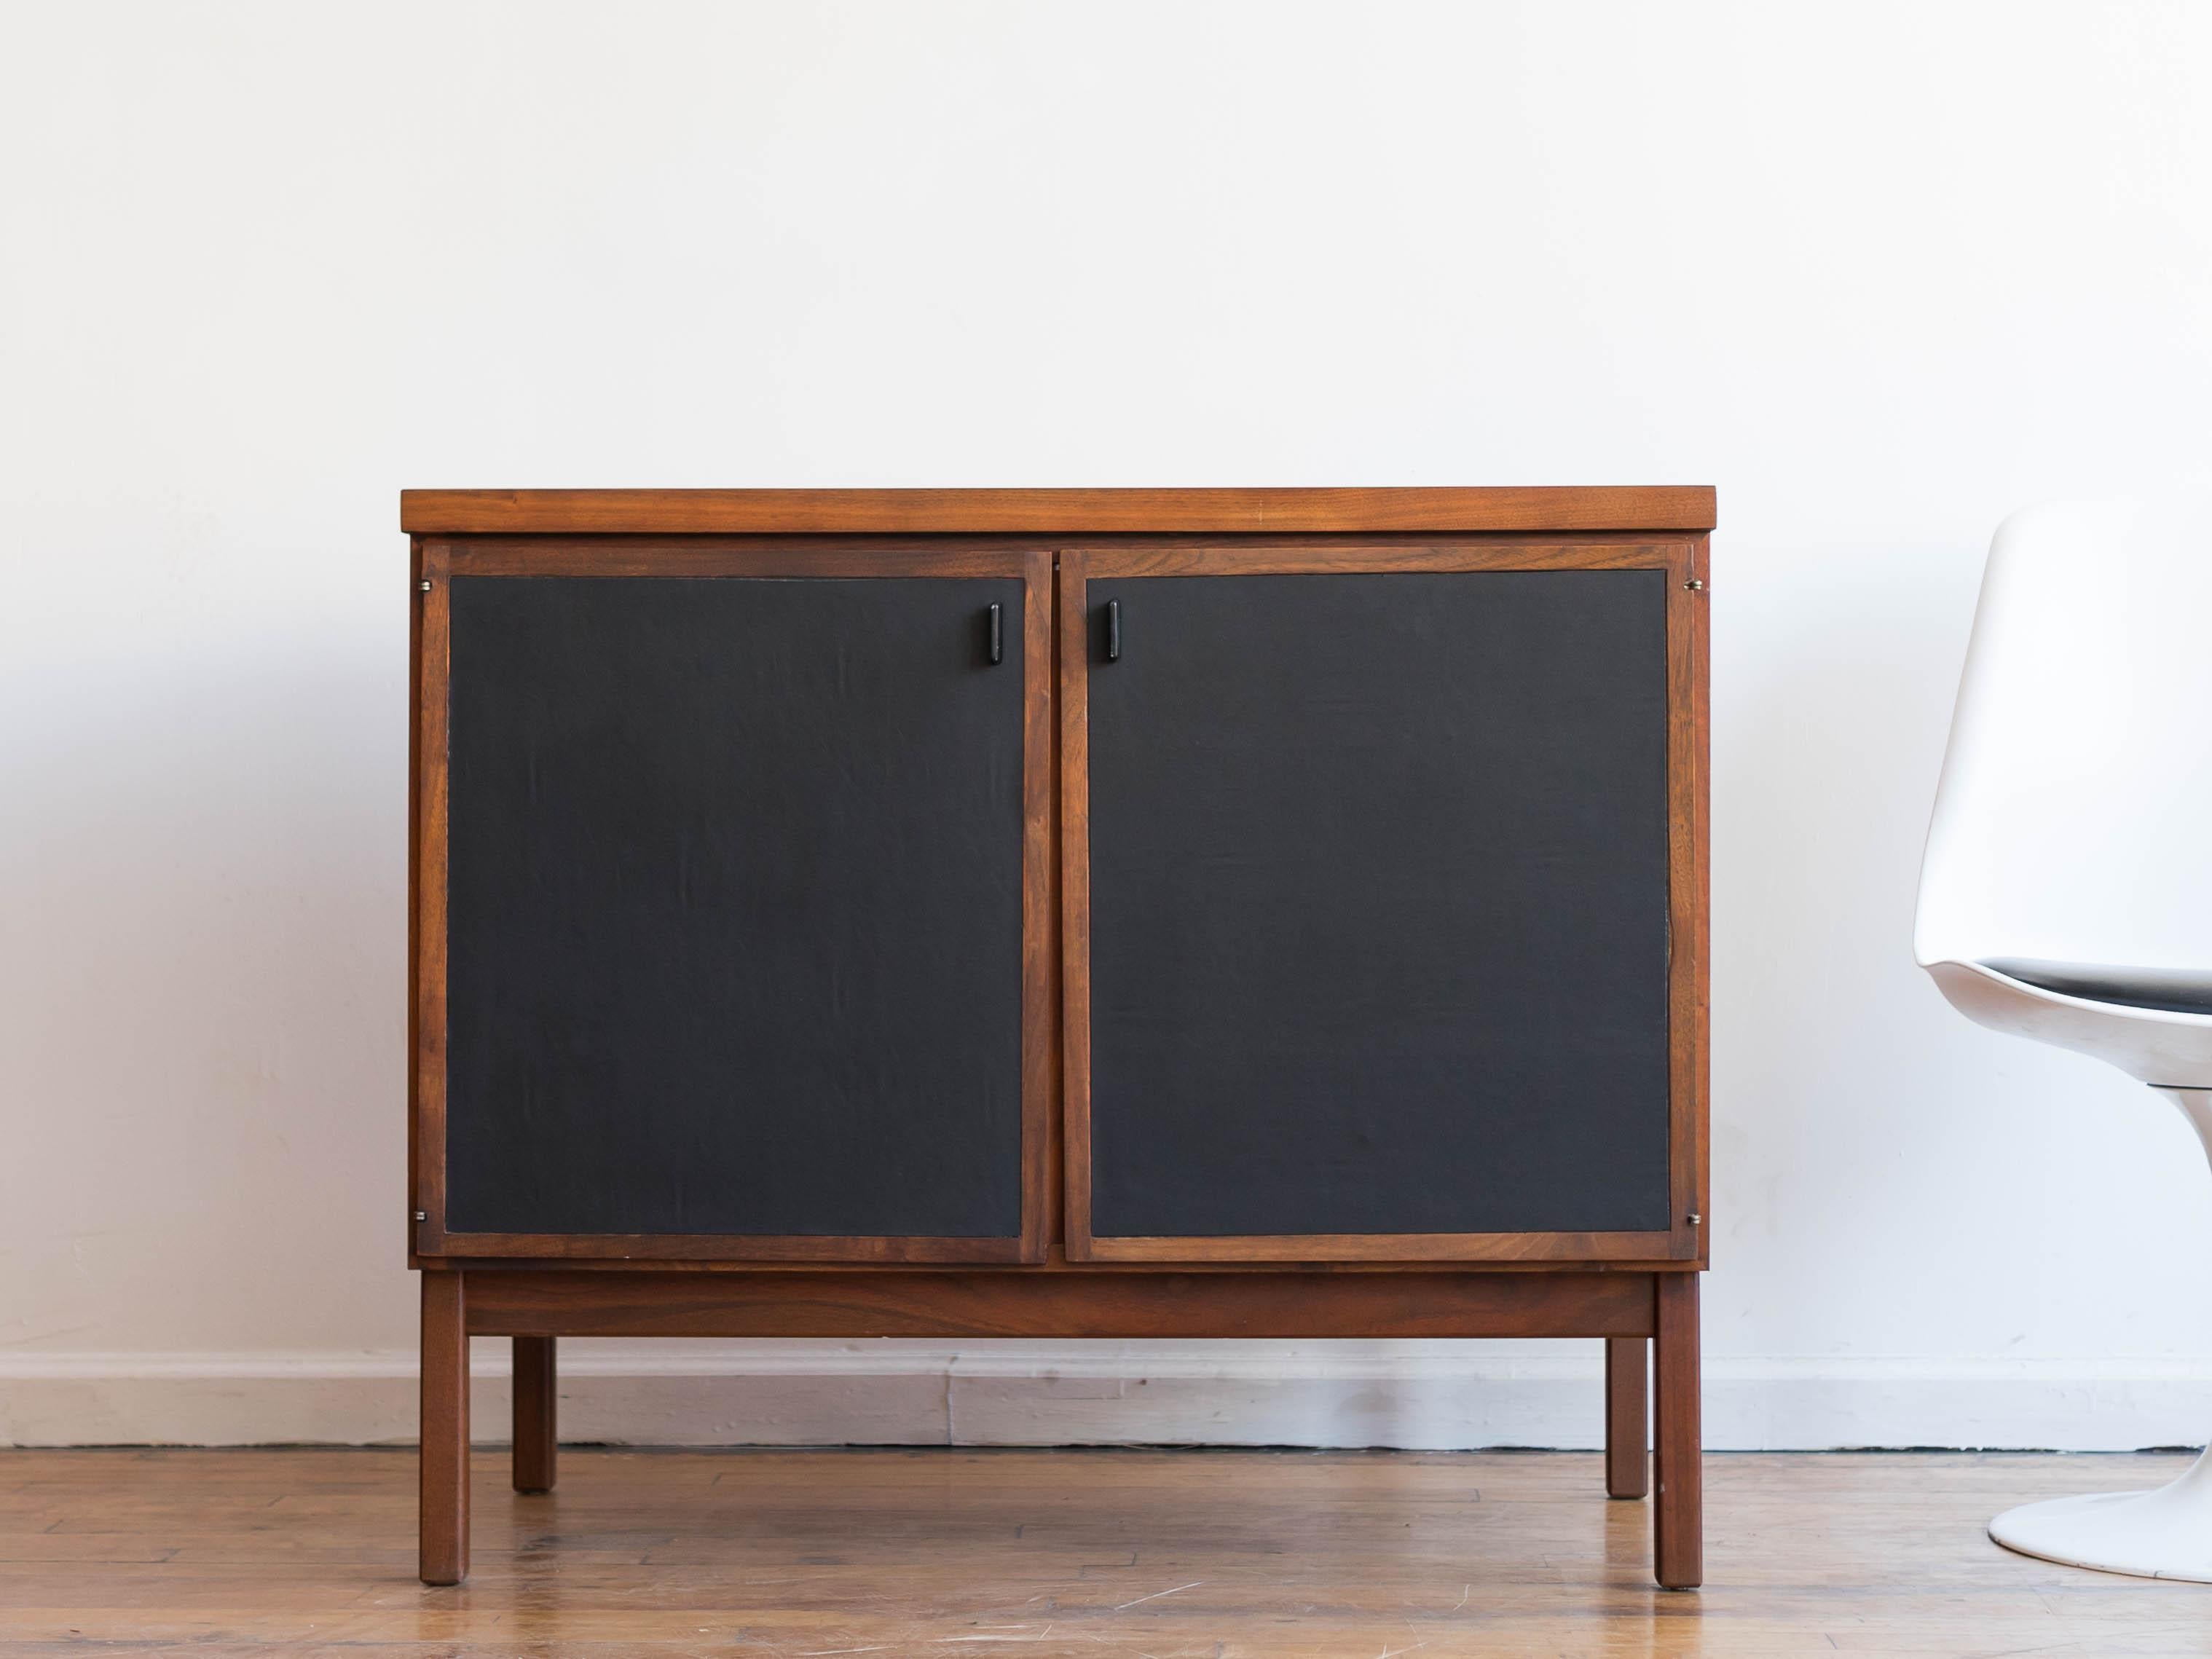 Please inquire about discounted local/regional delivery 

36” x 18” x 30.5”H

Versatile two door cabinet designed by Jack Cartwright for Founders Furniture. 
•faux leather upholstery on the doors
•Founders' signature black metal finger pulls
•one